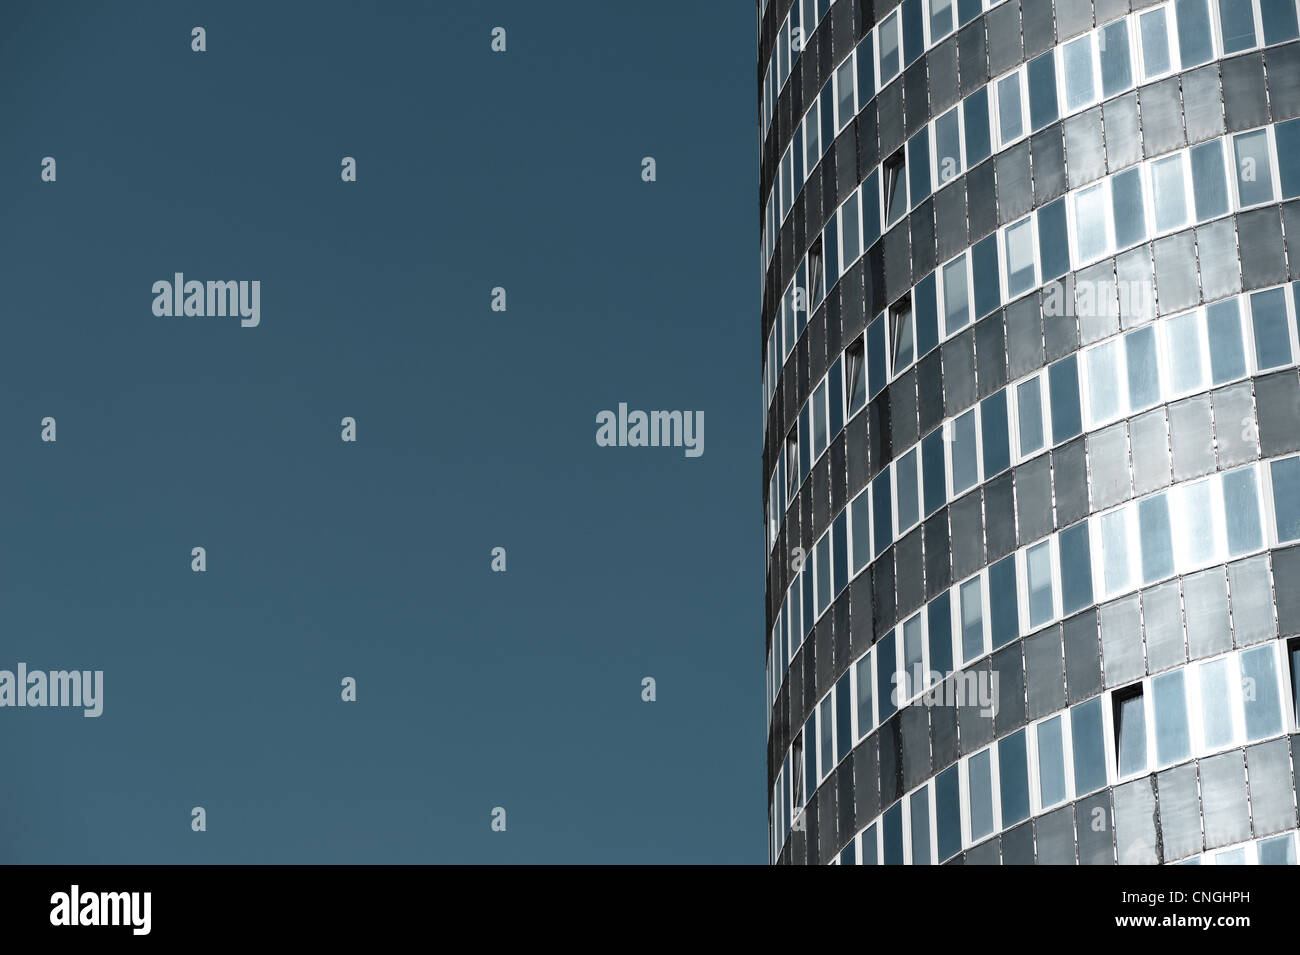 Detail of the Jentower in Jena, Thuringia, Europe, Germany Stock Photo